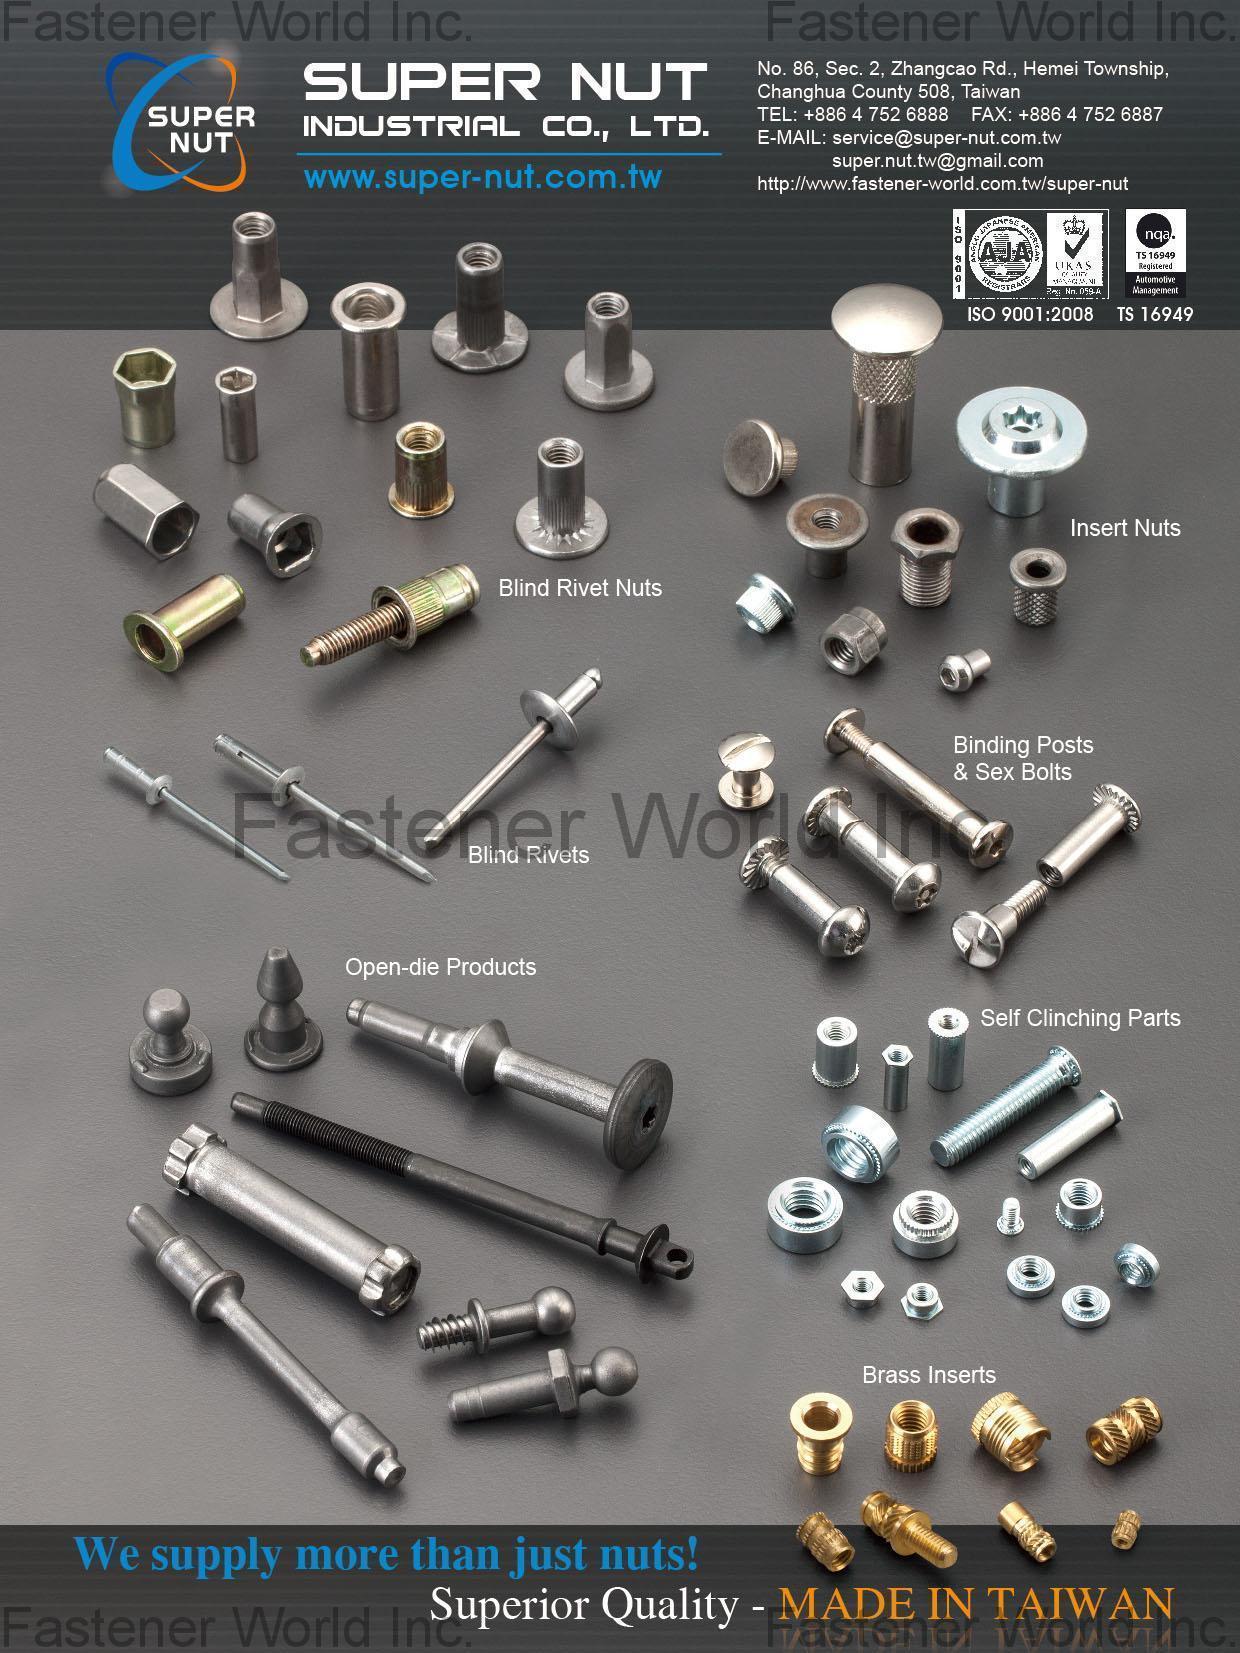 SUPER NUT INDUSTRIAL CO., LTD.  , Blind Rivet Nuts / Special Cold Forging Parts / Self Clinching Parts / Brass Inserts / Binding Posts & Sex Bolts , Special Cold / Hot Forming Parts